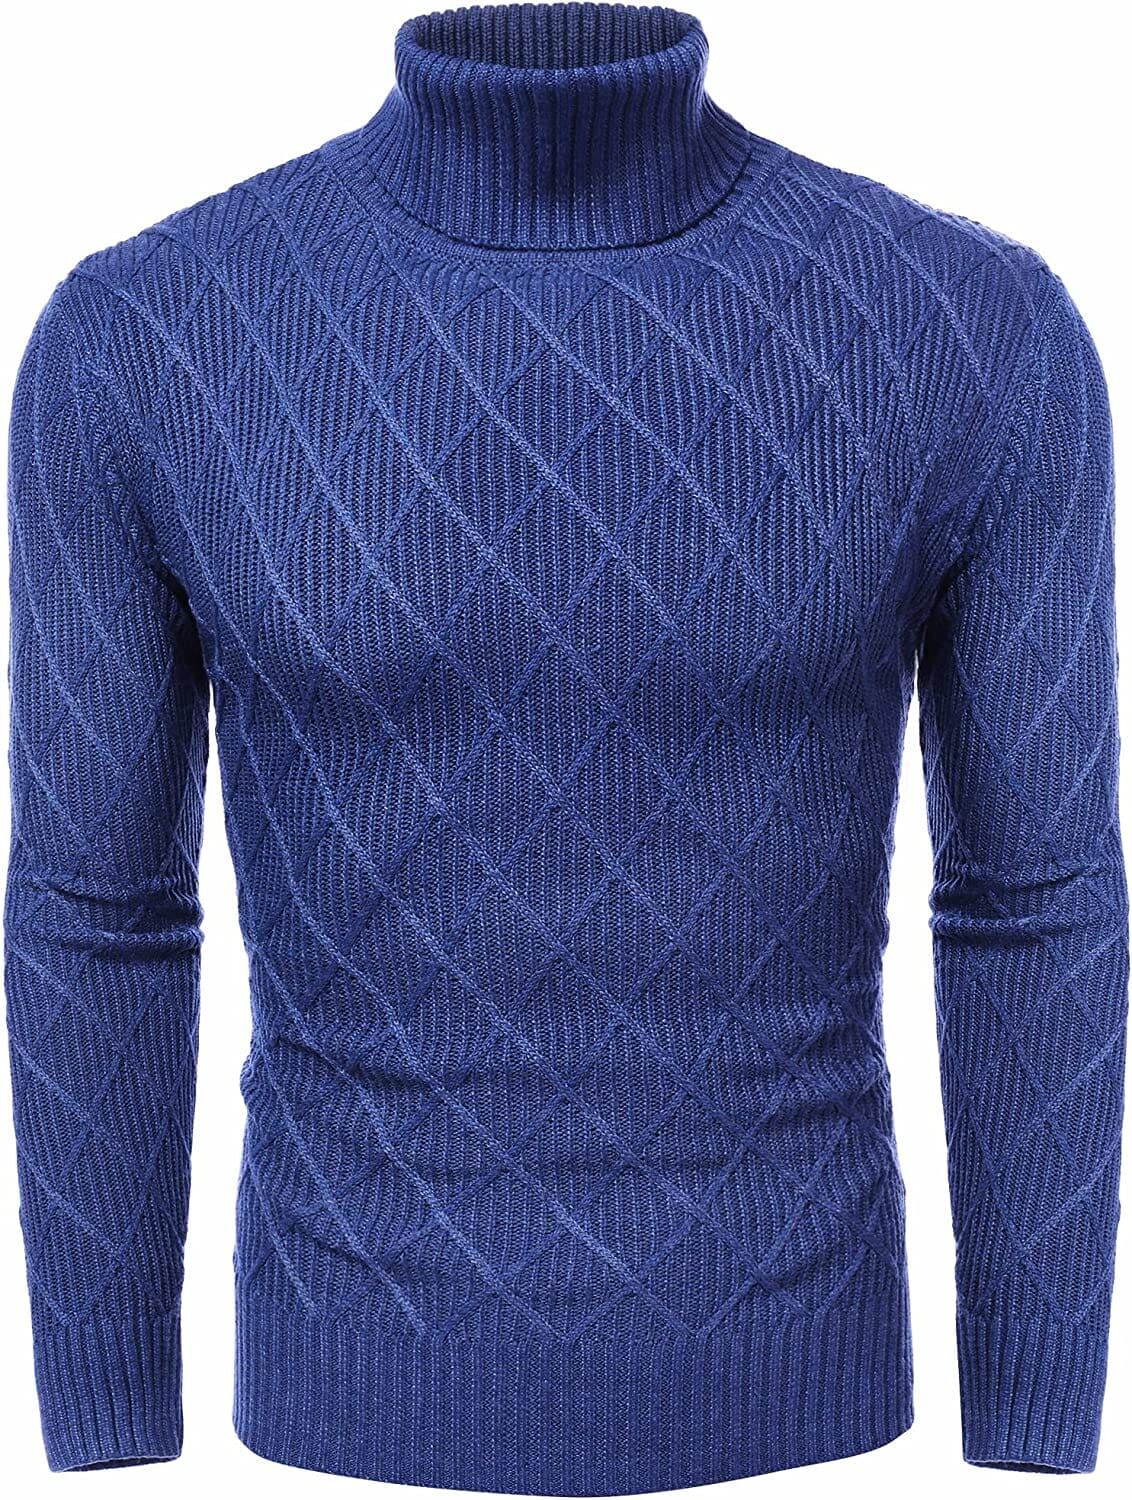 Slim Fit Thick Cotton Pullover Turtleneck Sweaters (US Only) Sweaters COOFANDY Store Blue S 